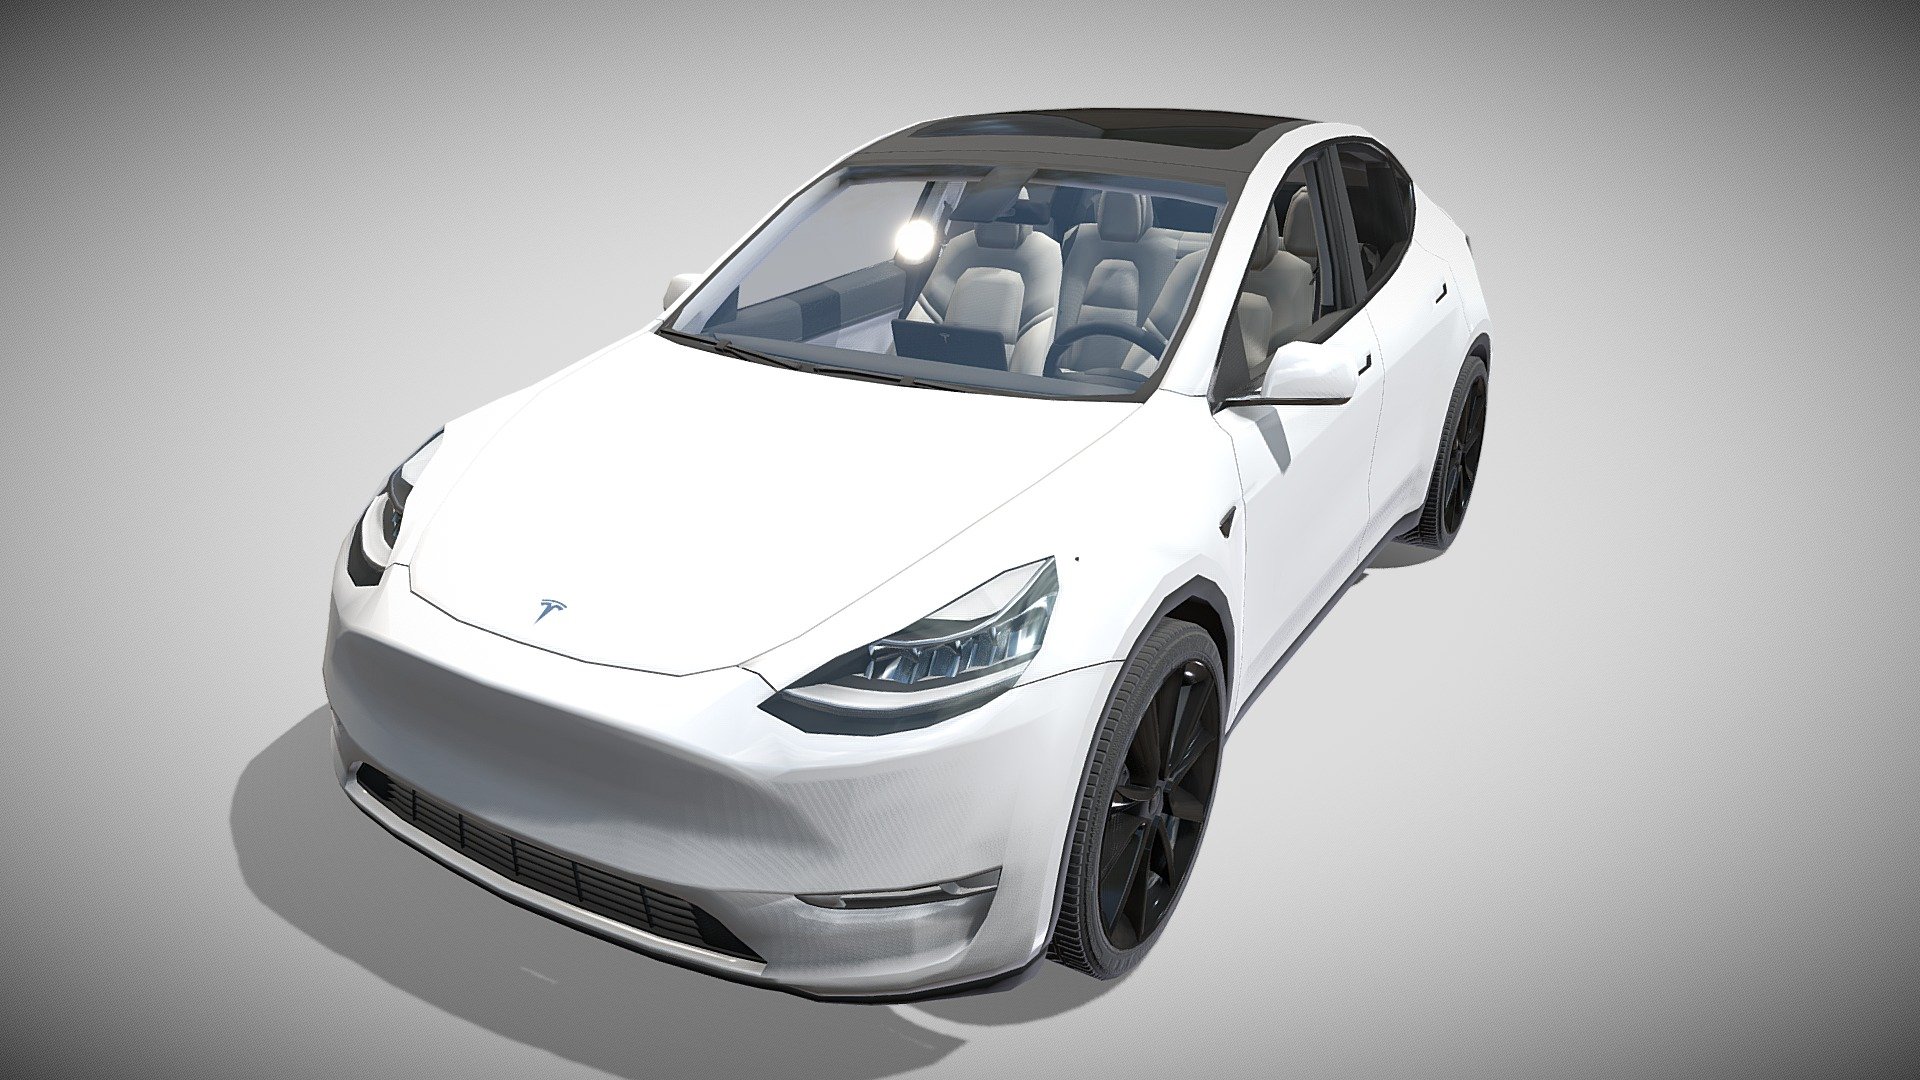 Tesla Model Y with a detailed interior 3d model rendered with Cycles in Blender, as per seen on attached images.

File formats:
-.blend, rendered with cycles, as seen in the images;
-.blend, open, rendered with cycles, as seen in the images;
-.obj, with materials applied;
-.obj, open, with materials applied;
-.dae, with materials applied;
-.dae, open, with materials applied;
-.fbx, with material slots applied;
-.fbx, open, with material slots applied;
-.stl;
-.stl, open;

Files come named appropriately and split by file format.

3D Software:
The 3D model was originally created in Blender 2.79 and rendered with Cycles.

Materials and textures:
The models have materials applied in all formats, and are ready to import and render.
The models come with twp png textures.

Preview scenes:
The preview images are rendered in Blender using its built-in render engine &lsquo;Cycles' 3d model